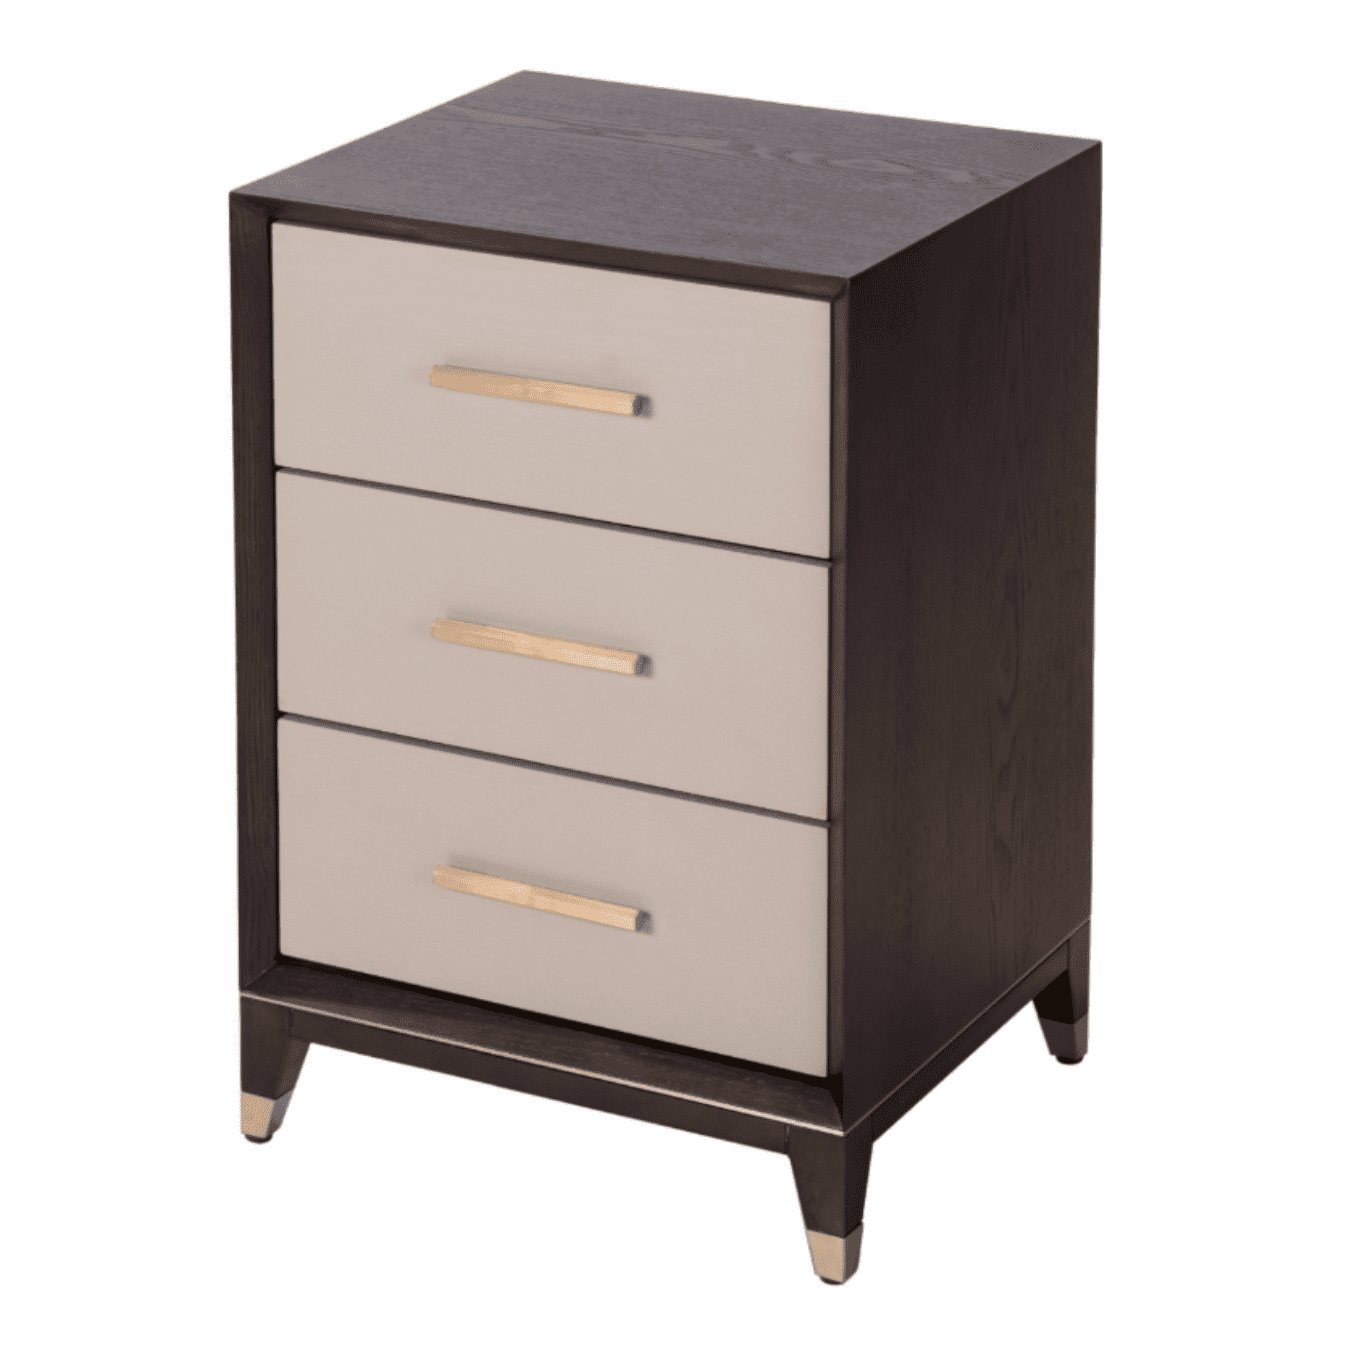 Armand 3 Drawer Bedside Table in Chocolate Ceramic Grey and Brass